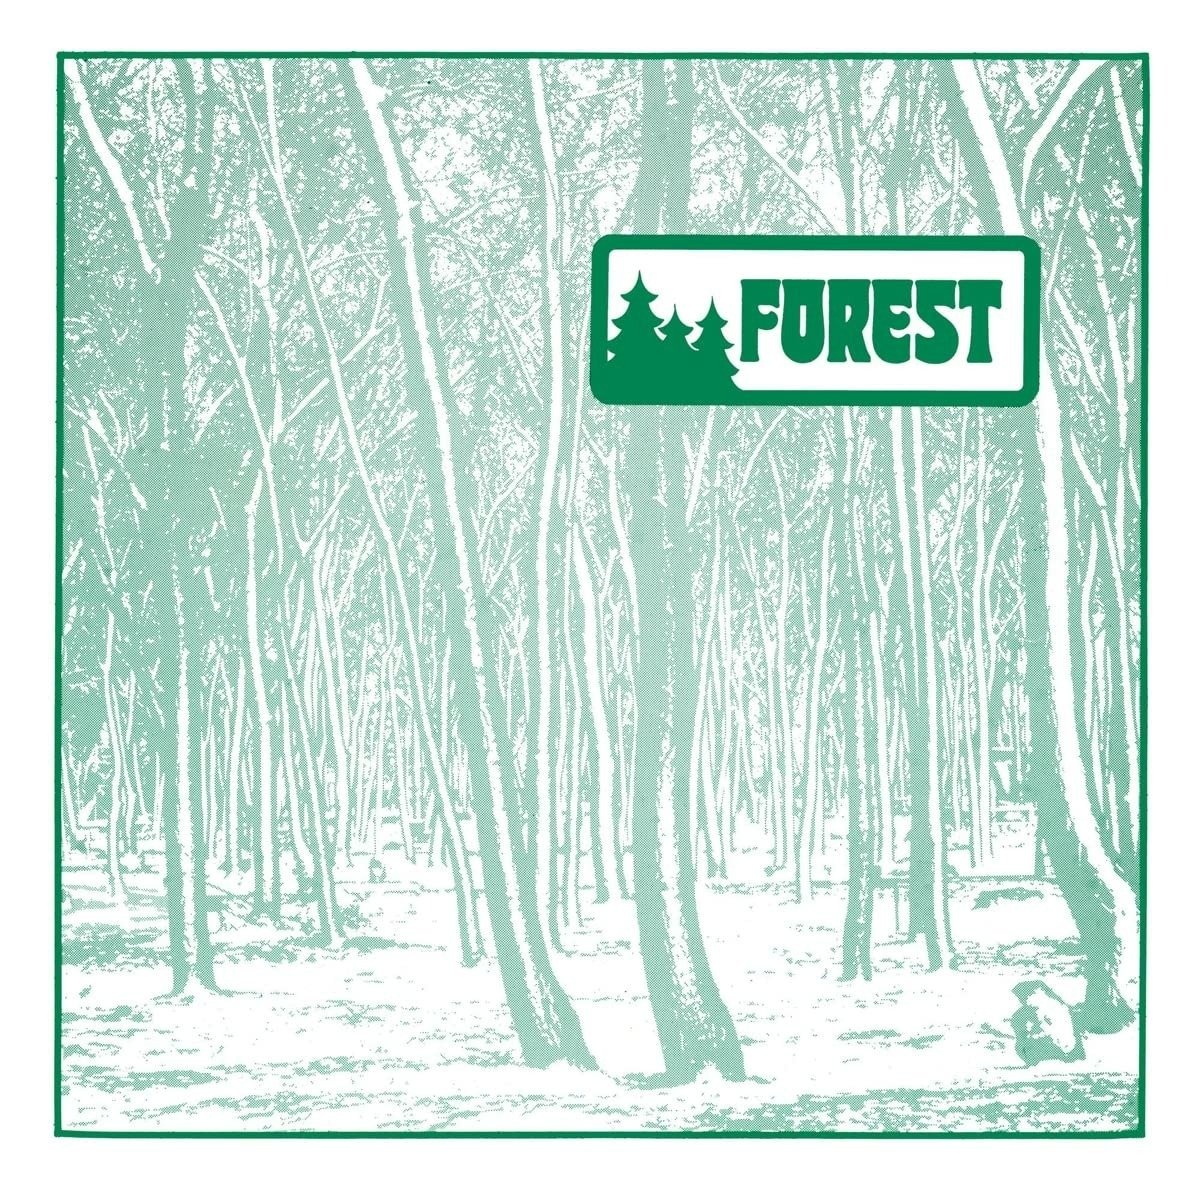 Обложка лесная. The Forest обложка. Форест 2023. Обложка альбома лес. The Forest 2023.